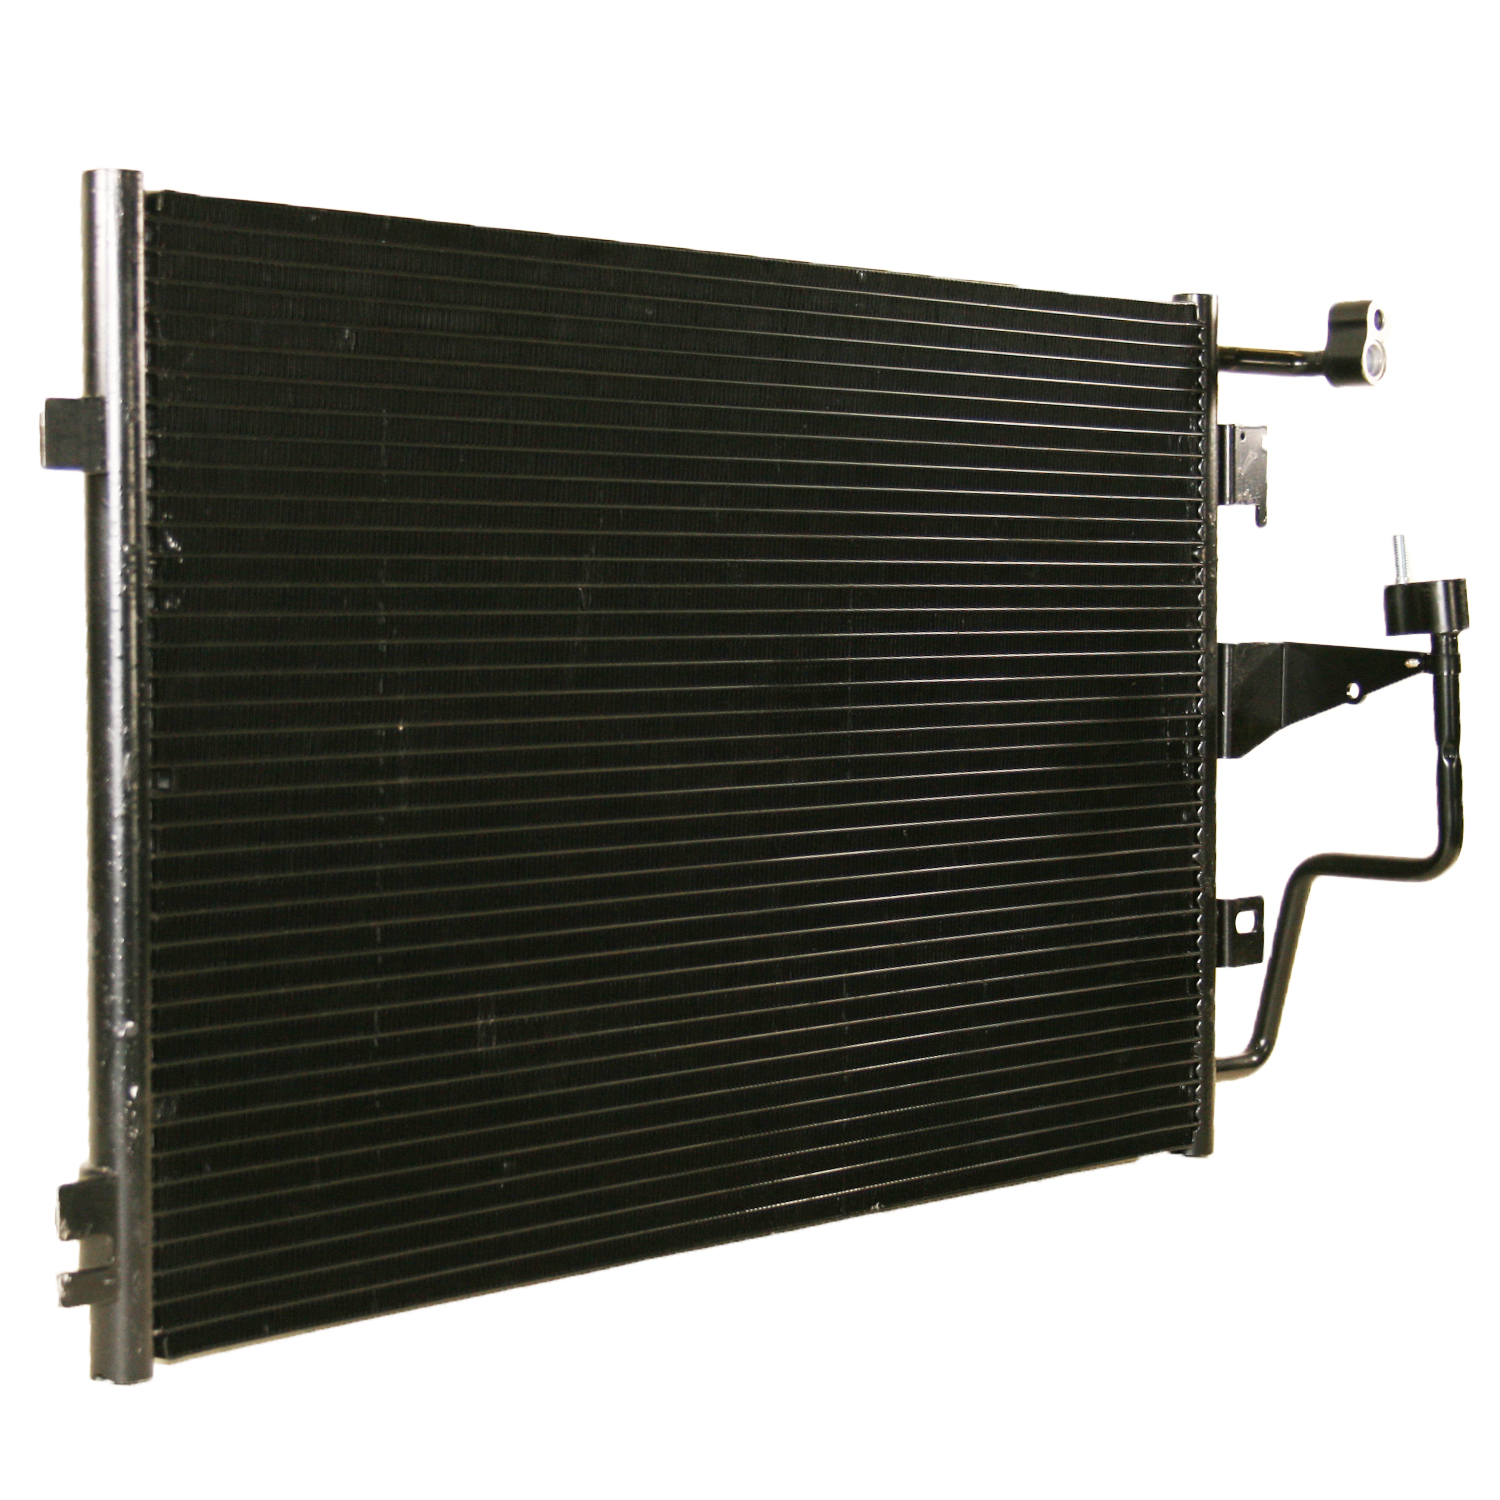 TCW Condenser 44-4612 New Product Image field_60b6a13a6e67c